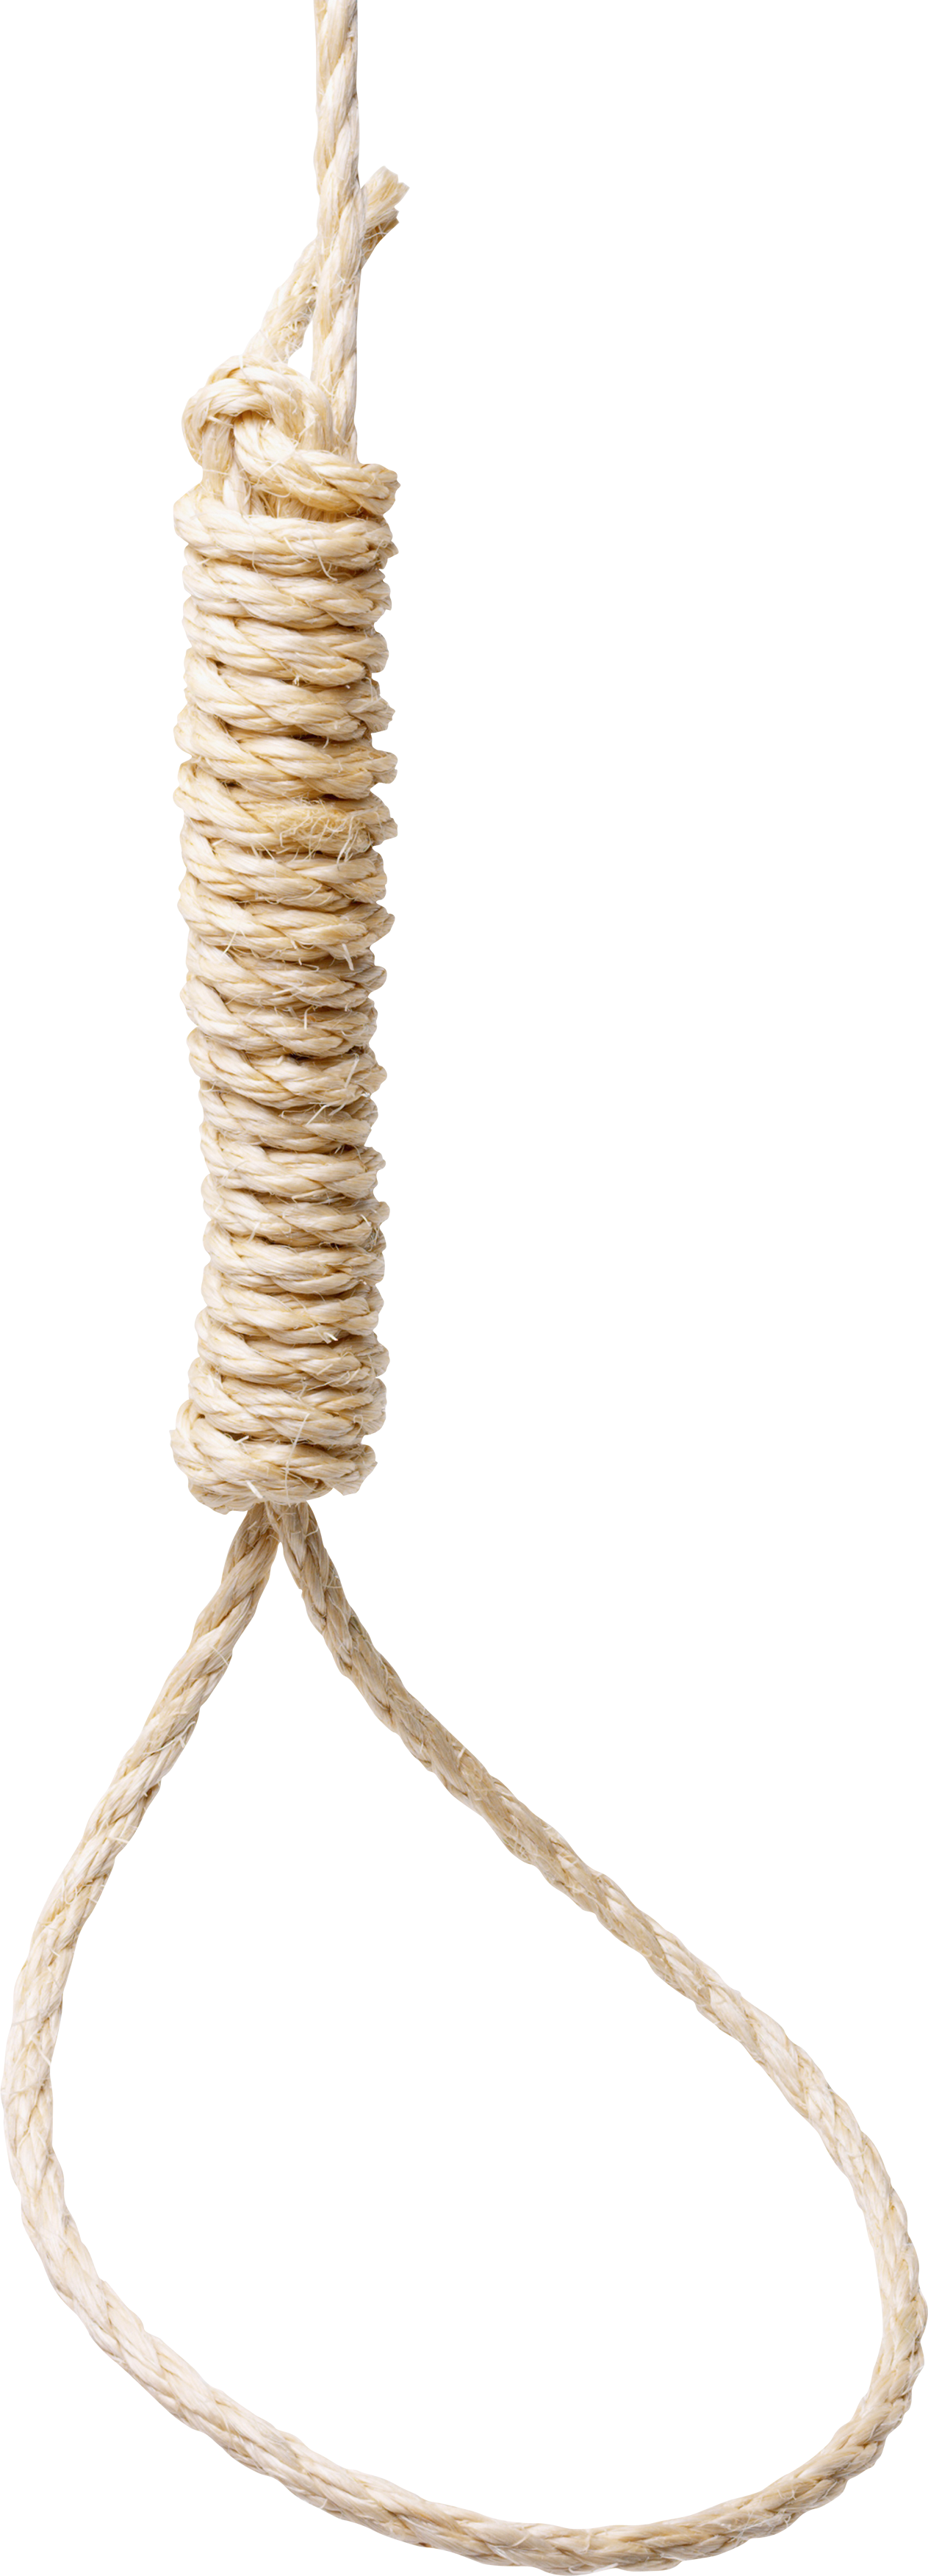 Rope HD PNG - 119054